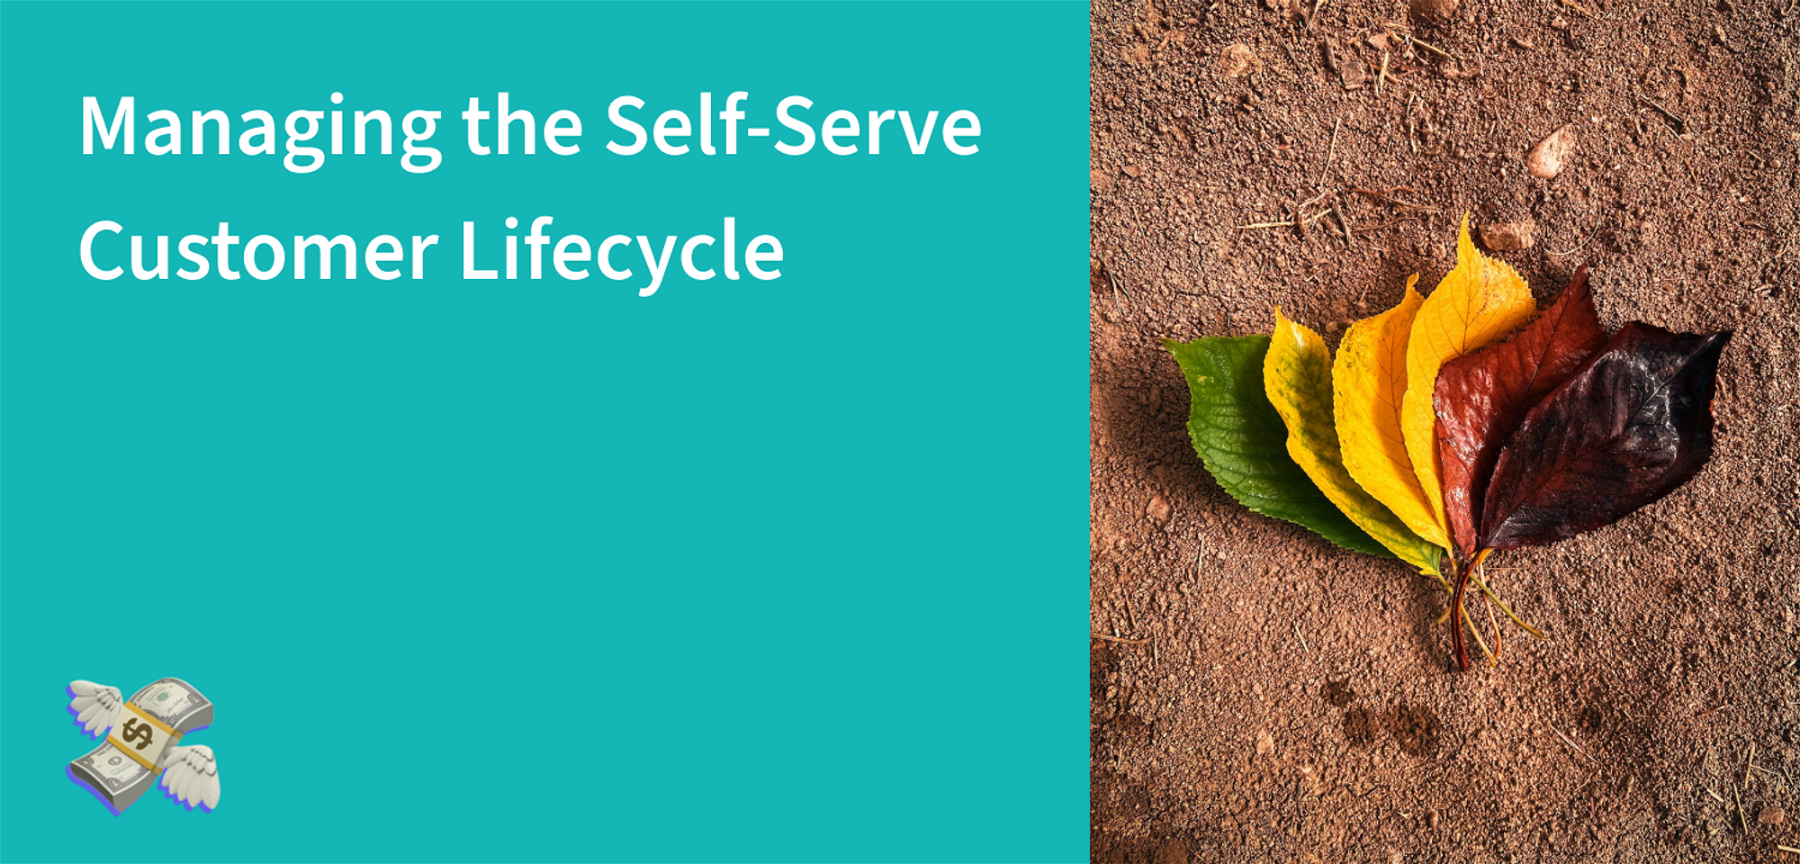 Managing the Self-Serve Customer Lifecycle